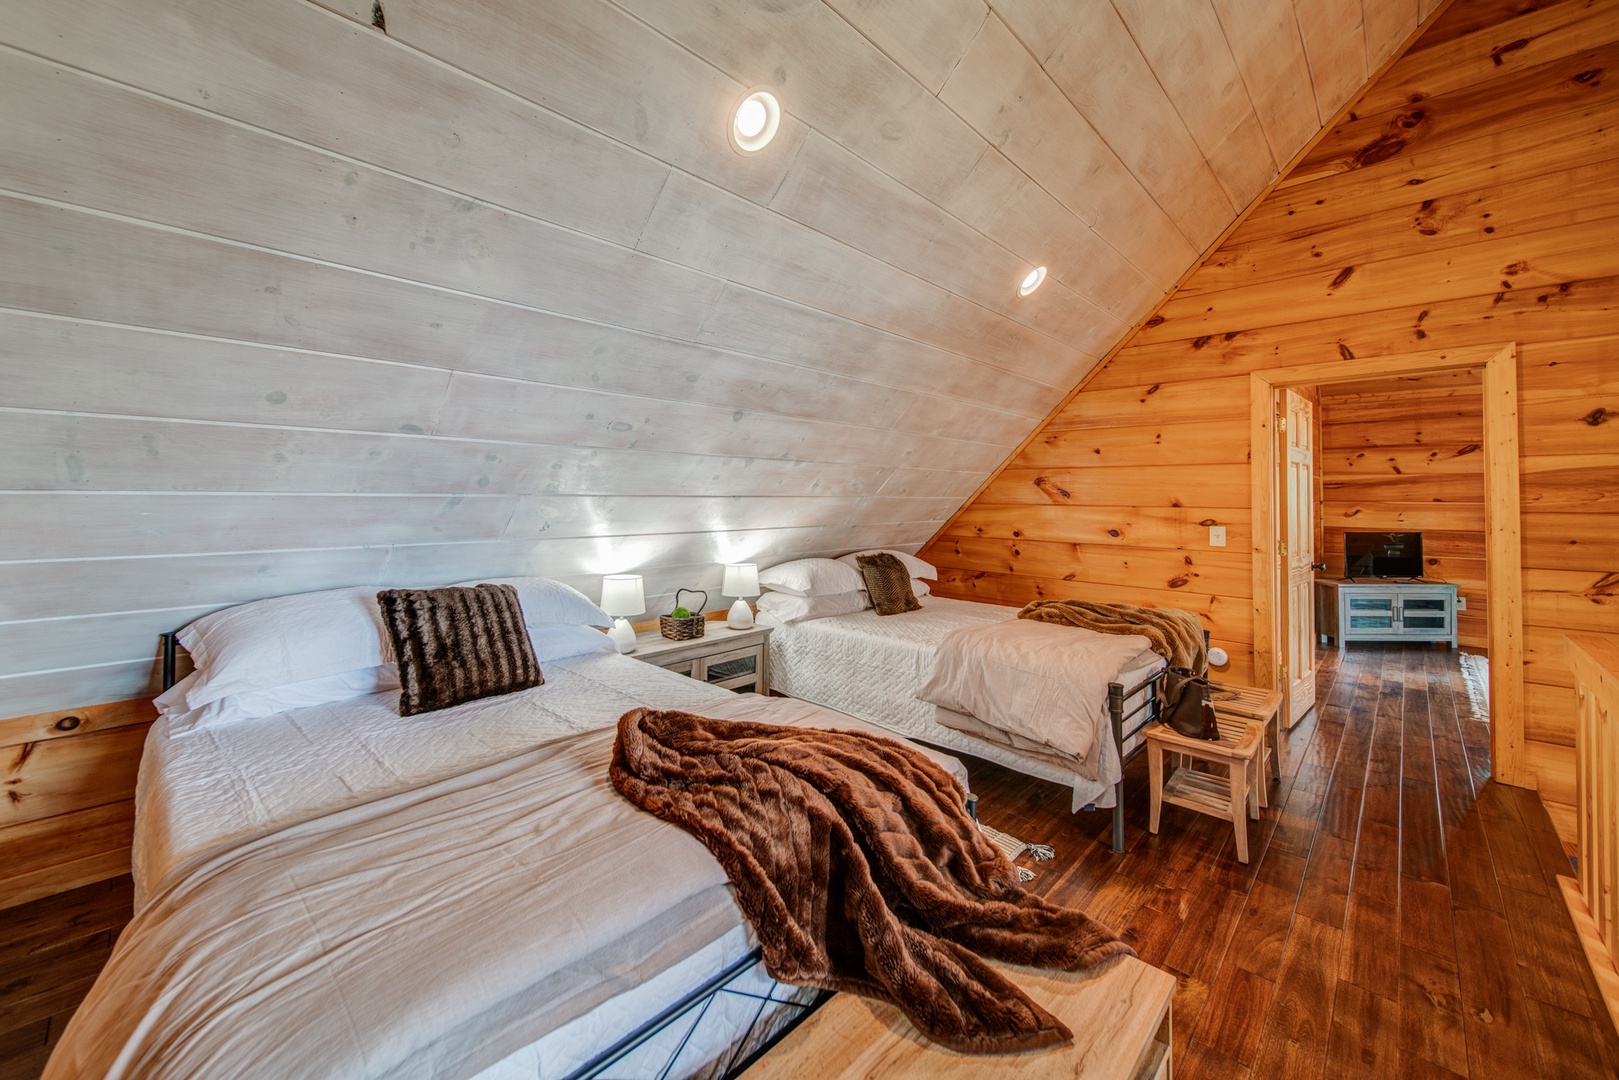 The second-level loft offers a pair of comfy queen beds